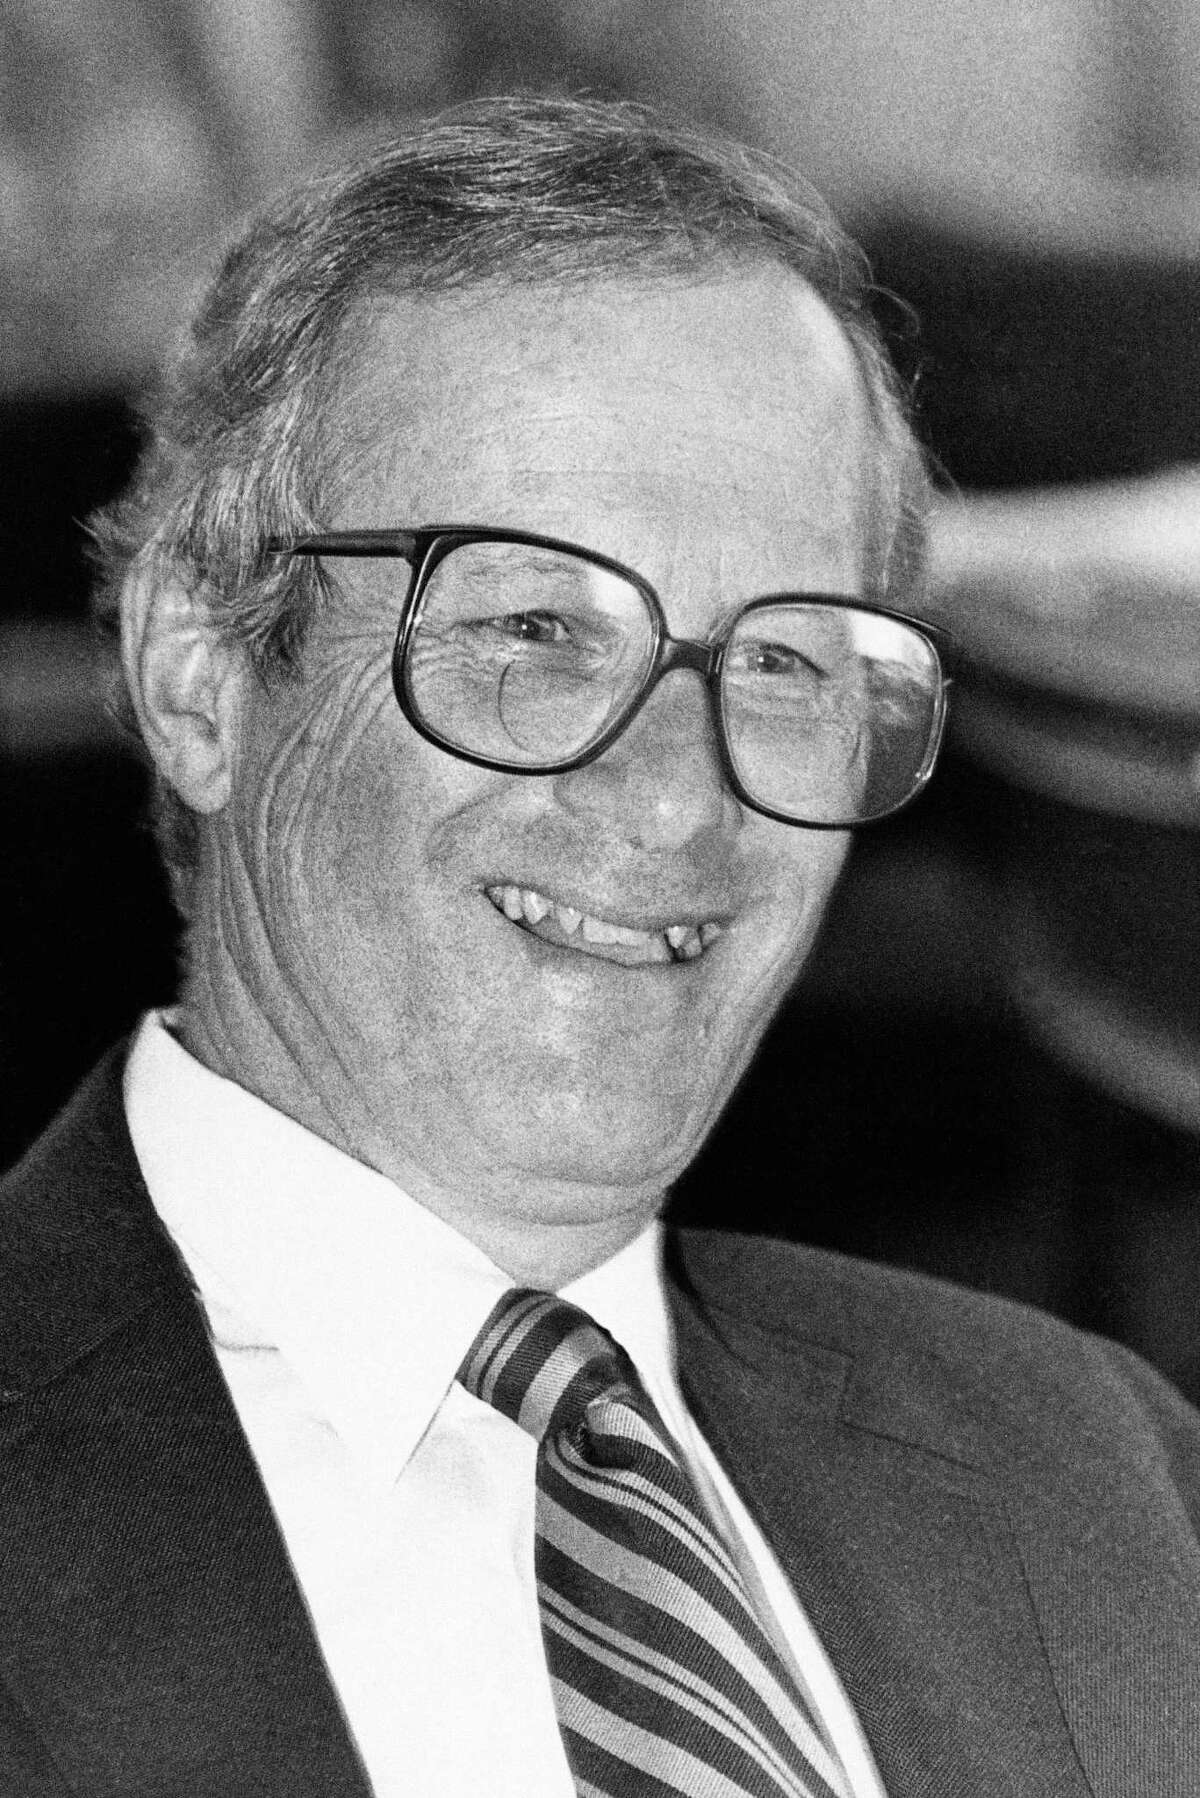 American University of Beirut President Malcolm Kerr, 52, was assassinated outside his office on the campus of the University located in West Beirut in Lebanon, Wednesday, Jan. 18, 1984.(AP Photo)